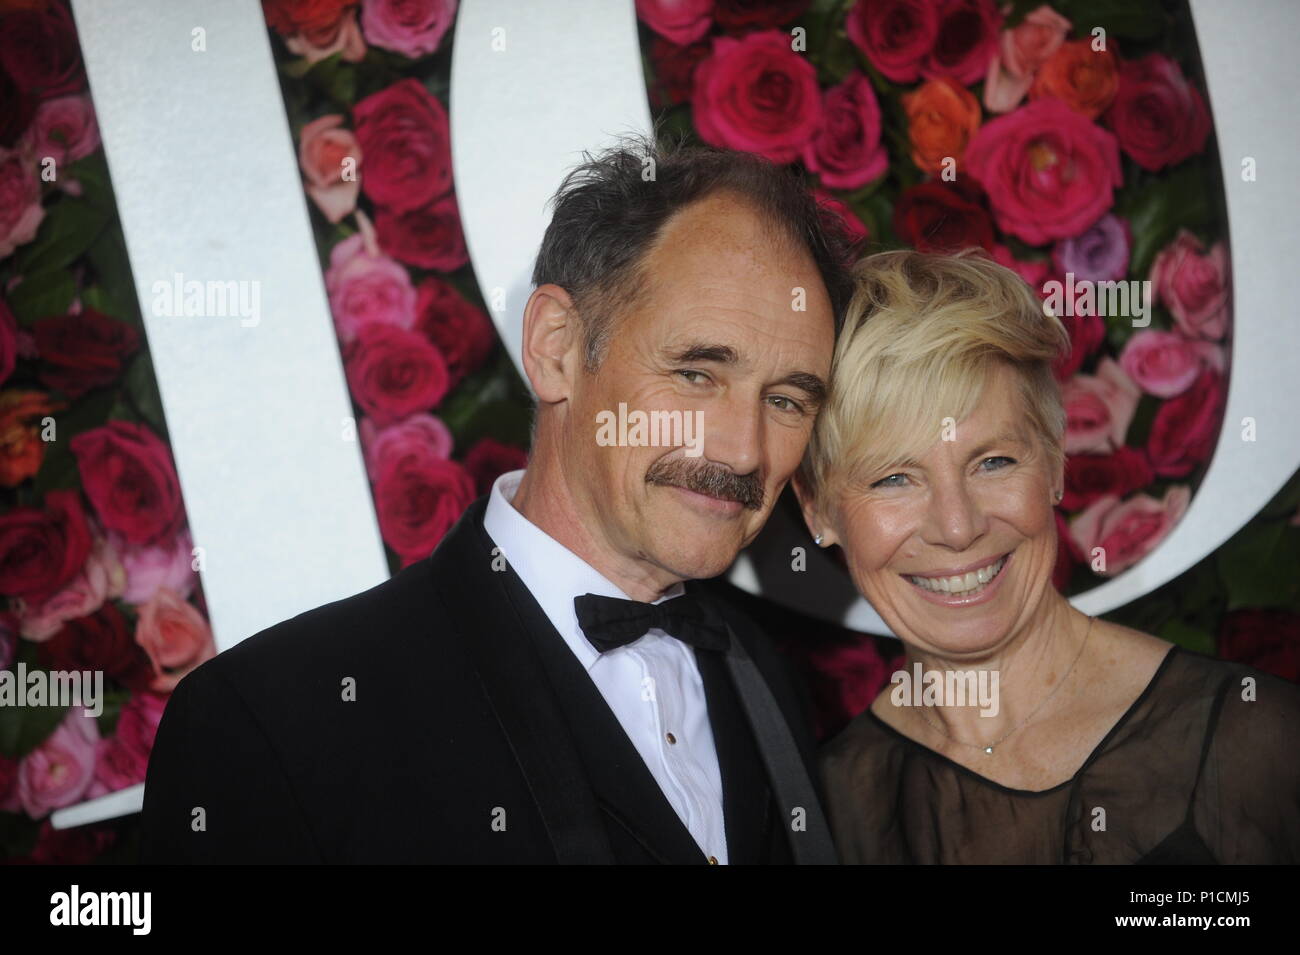 New York, NY, USA. 10th June, 2018. Mark Rylance, Claire van Kampen attends the 72nd Annual Tony Awards on June 10, 2018 at Radio City Music Hall in New York City. People: Mark Rylance, Claire van Kampen Credit: Hoo Me.Com/Media Punch/Alamy Live News Stock Photo